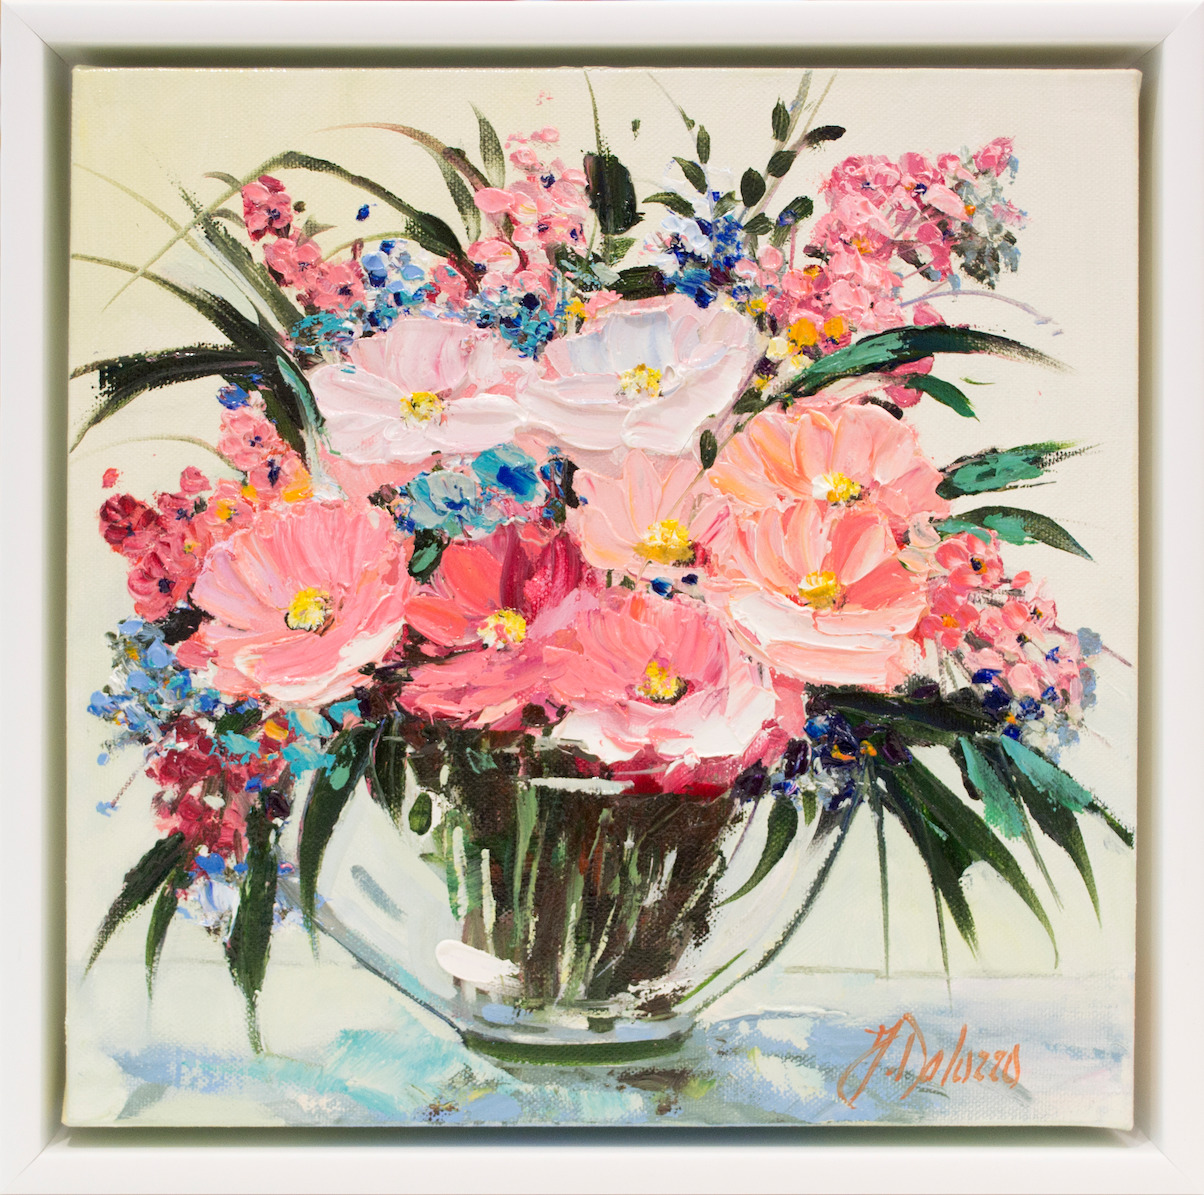 Framed Front View Of Still Life Painting "Forever Yours" By Judith Dalozzo